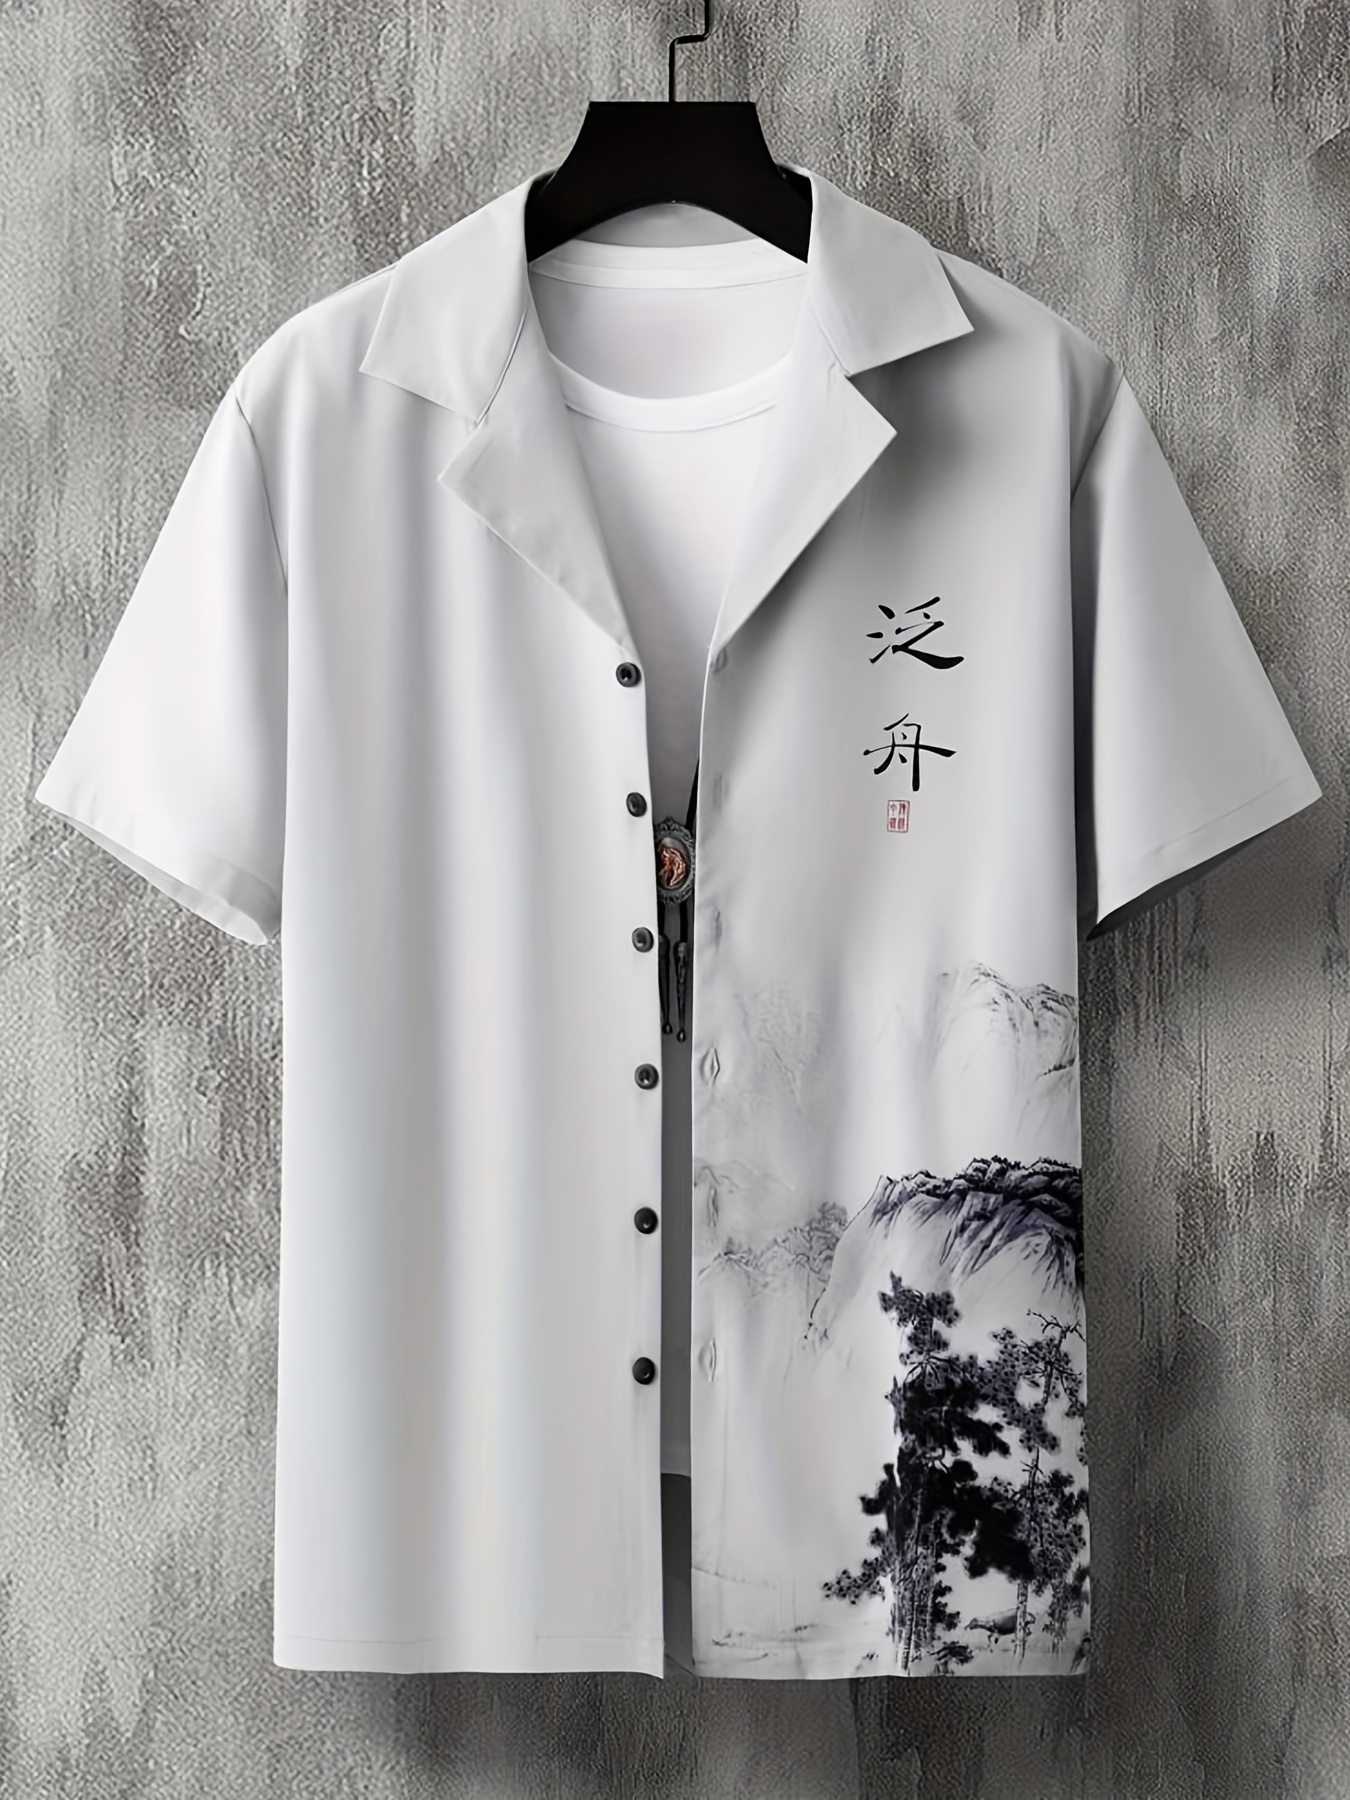 Plus Size Men&#39;s Ink Painting Graphic Print Lapel Shirt With Short Sleeves For Summer, Men Casual Clothing